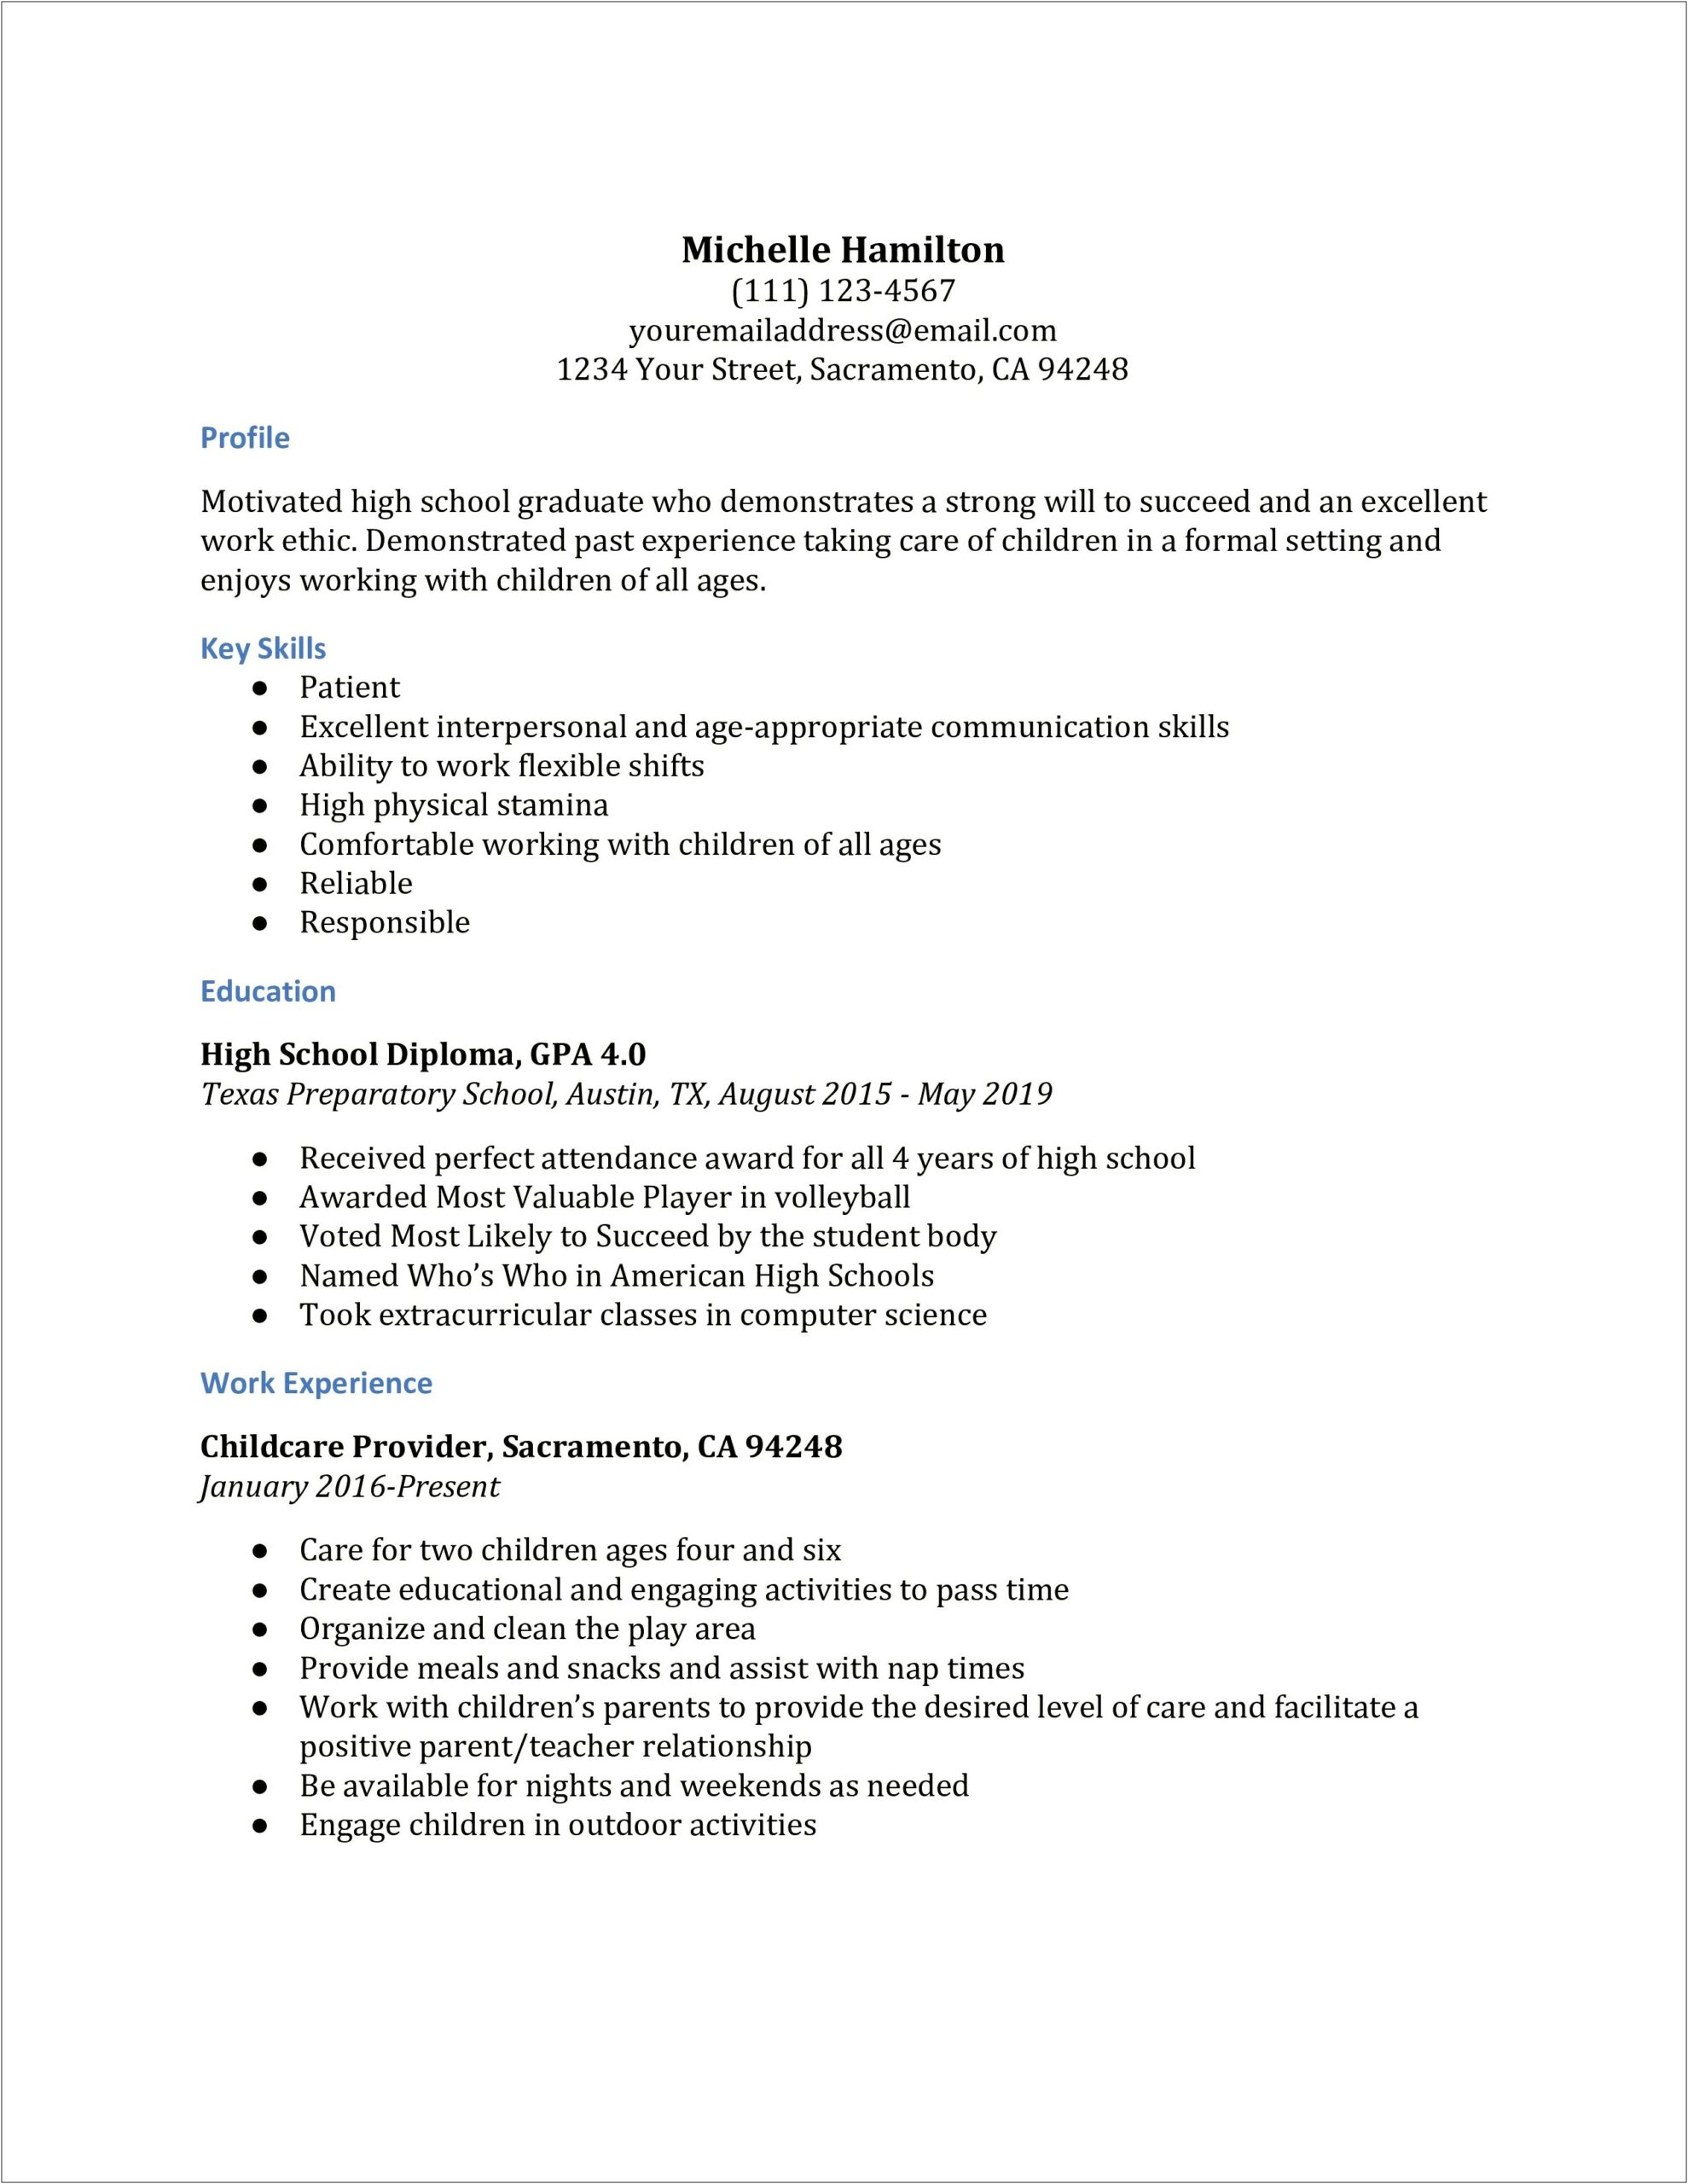 Listing Education On Resume Without High School Diploma